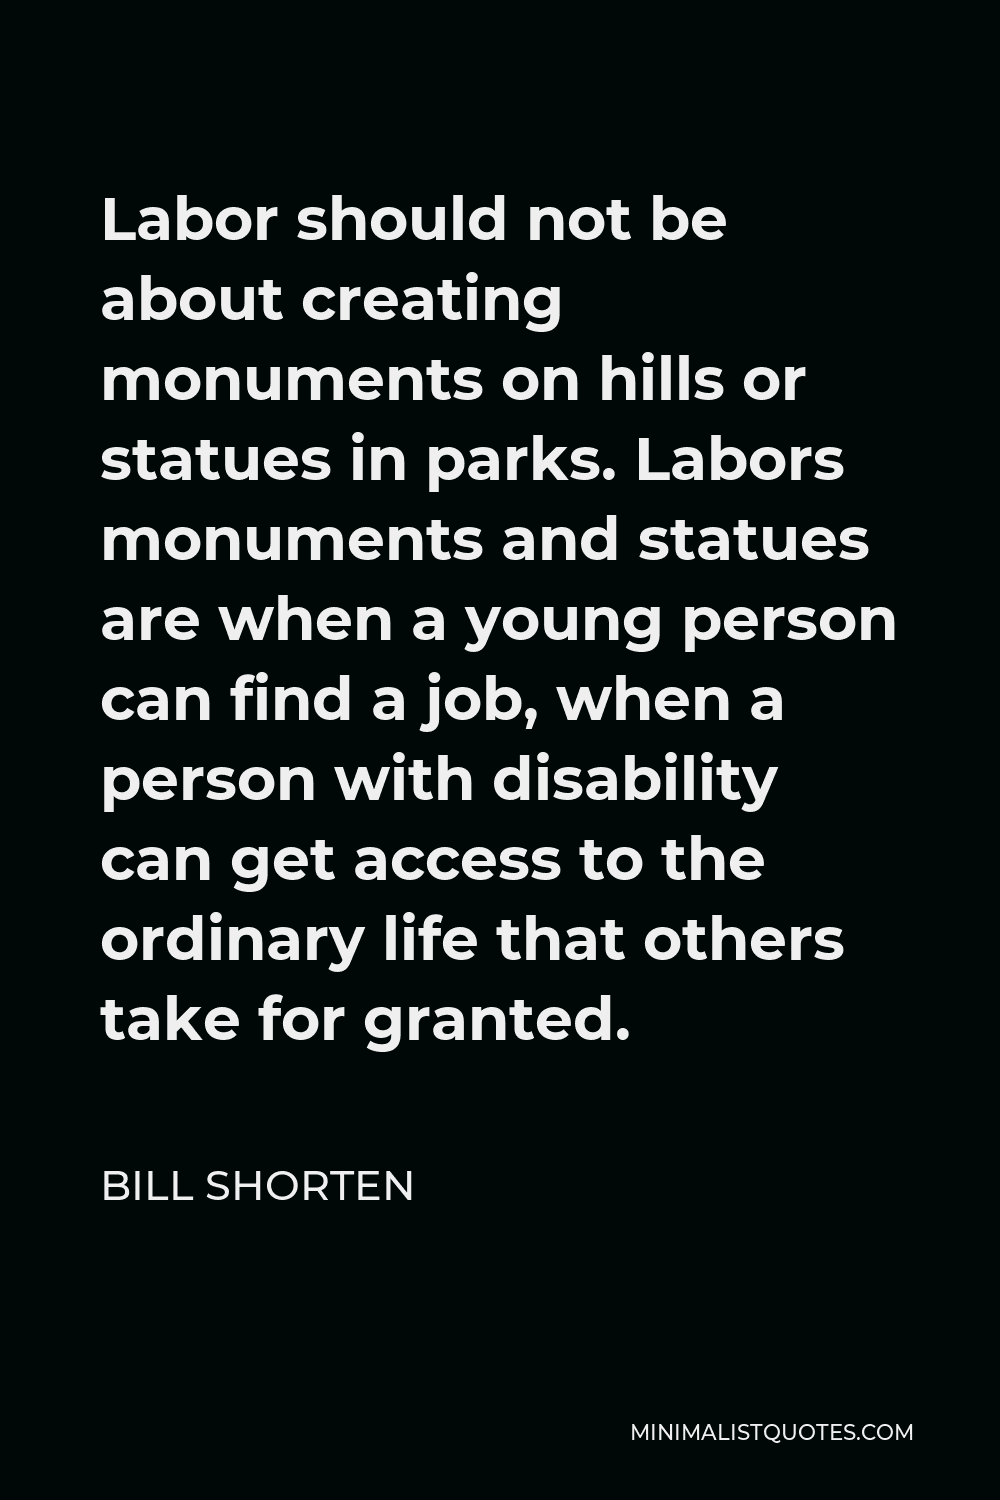 Bill Shorten Quote - Labor should not be about creating monuments on hills or statues in parks. Labors monuments and statues are when a young person can find a job, when a person with disability can get access to the ordinary life that others take for granted.